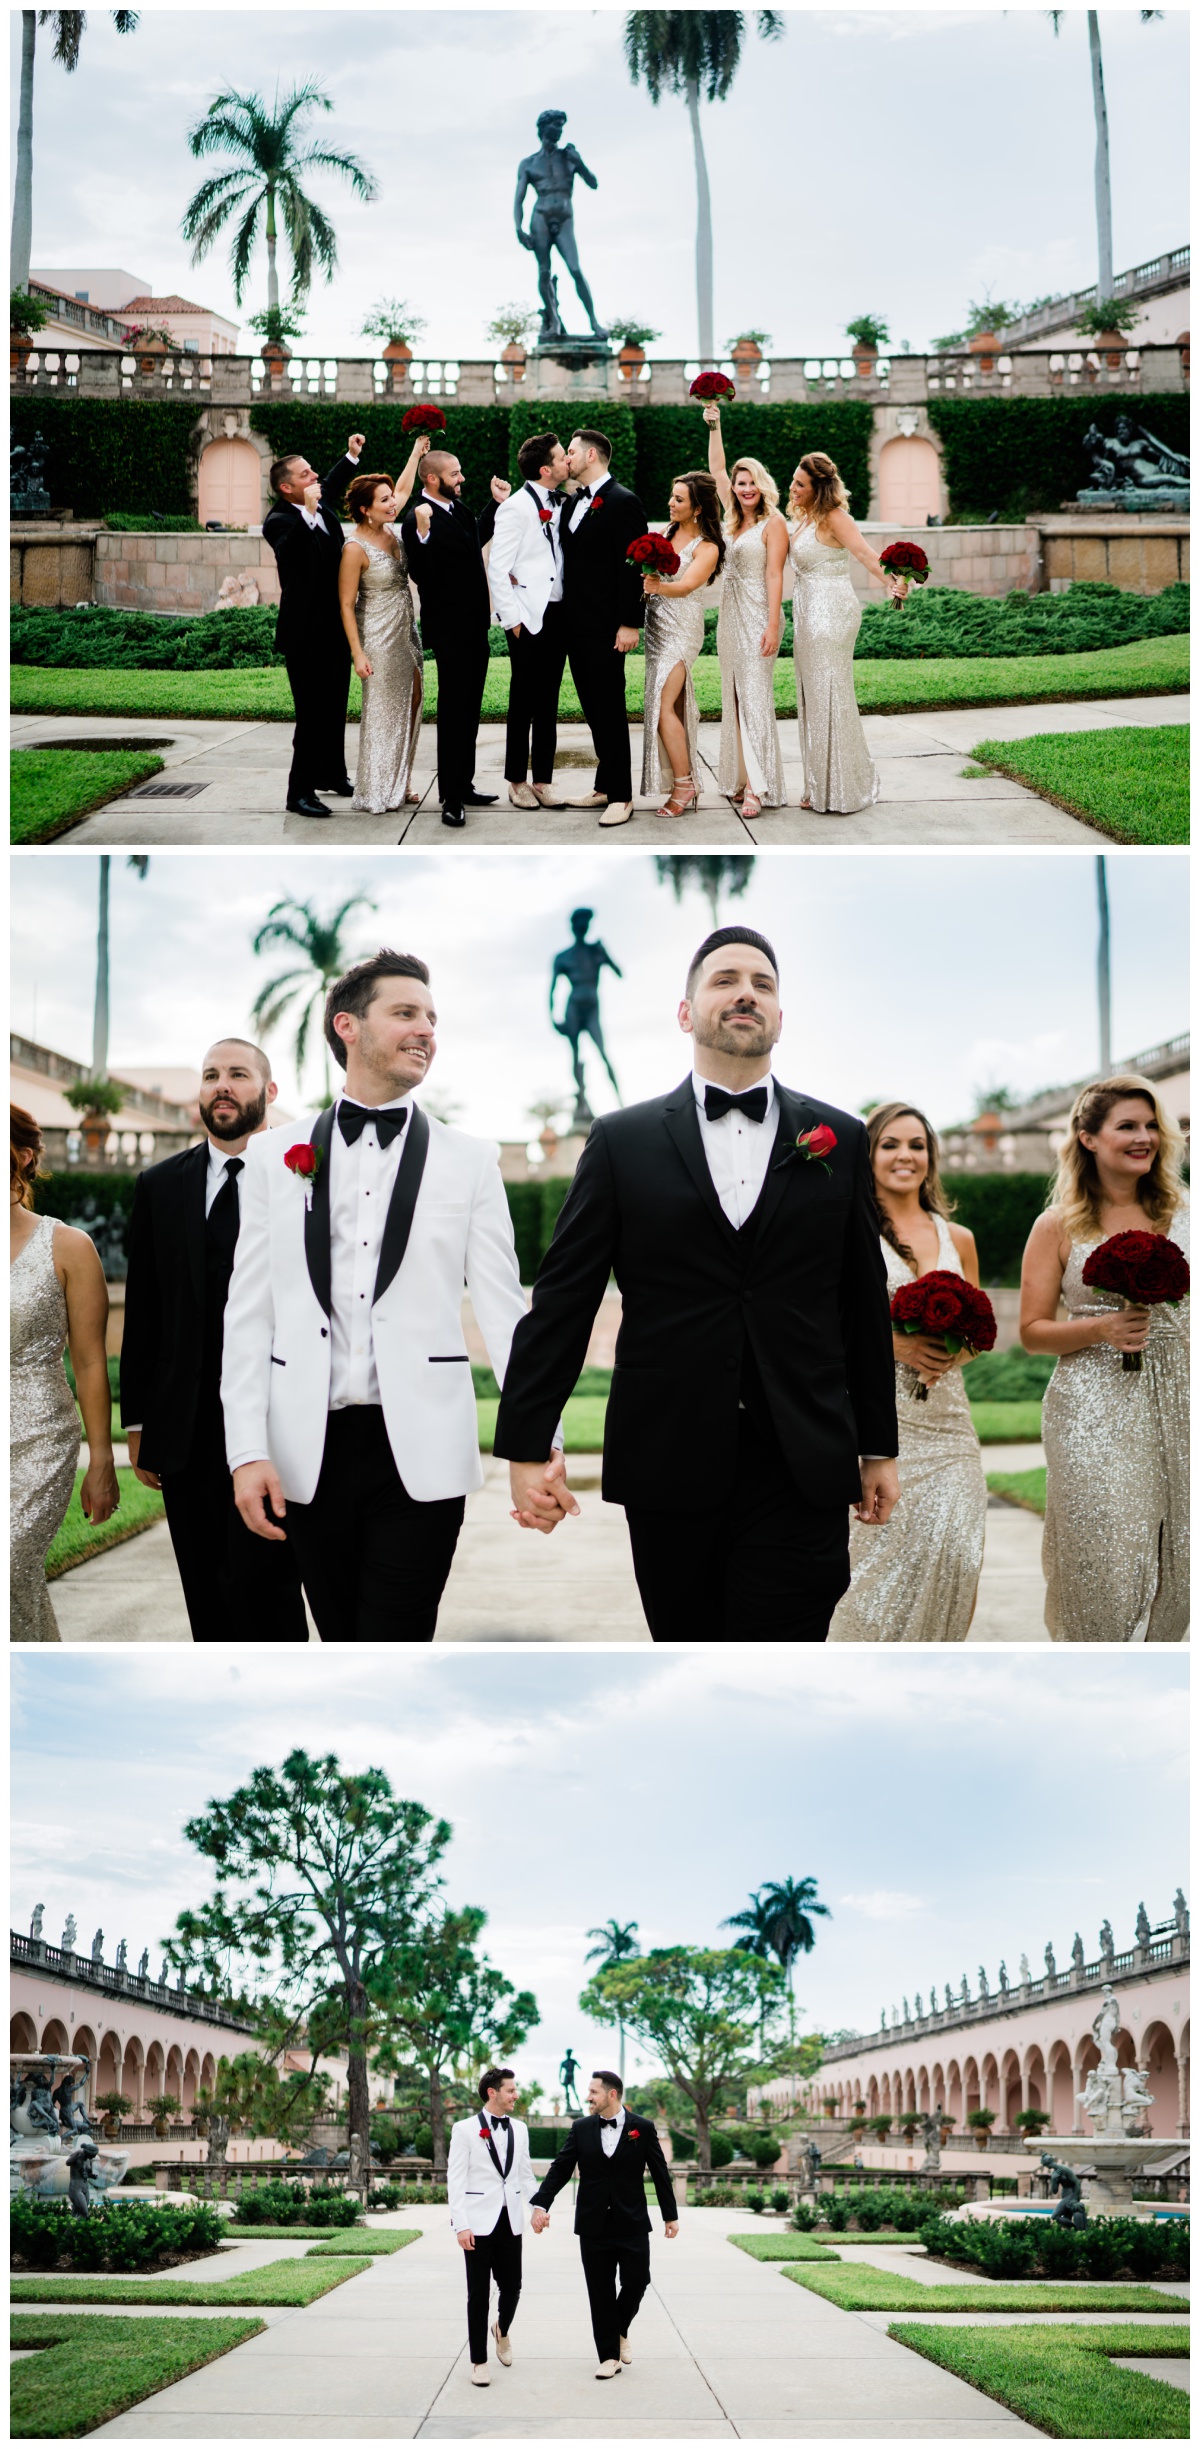 The Ringling Museum wedding